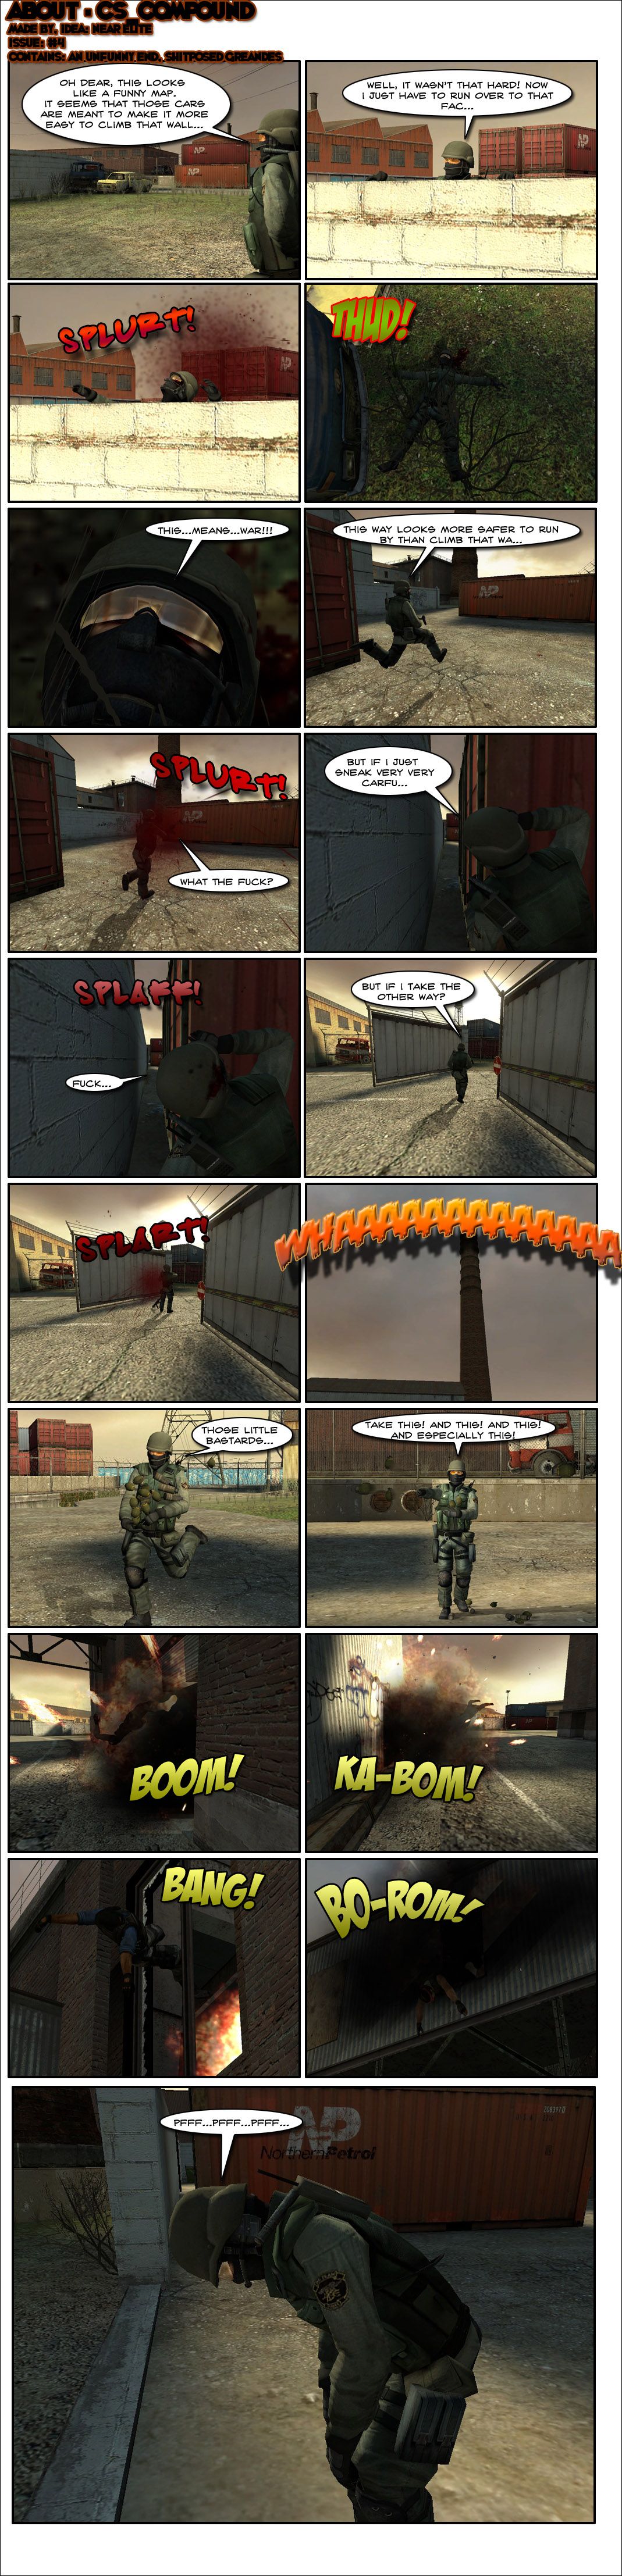 A counter-terrorist checks his surroundings at CS Compound and comments that it looks like a funny map. He spots a series of cars and figures they're meant to make it easier to climb the wall. He gets on top of them and says that it wasn't so hard, noting that he just has to run over to the factory nearby. As he finishes his sentence, someone shoots him in the head. He falls to the ground, then mumbles that this means war. He next tries rushing out through a separate path, saying it looks safer to run by than climbing the cars, but gets shot again. On his next go, he tries sneaking by behind some crates, but someone shoots him anyway. Undeterred, he tries another way, but gets shot again. The counter-terrorist screams in anger at the skies, then comes out of spawn holding a dozen grenades. He tosses them out almost randomly in anger, screaming take this, and this and especially this. Each grenade hits a terrorist, killing them all. The counter-terrorist huffs and puffs in exhaustion. The end.